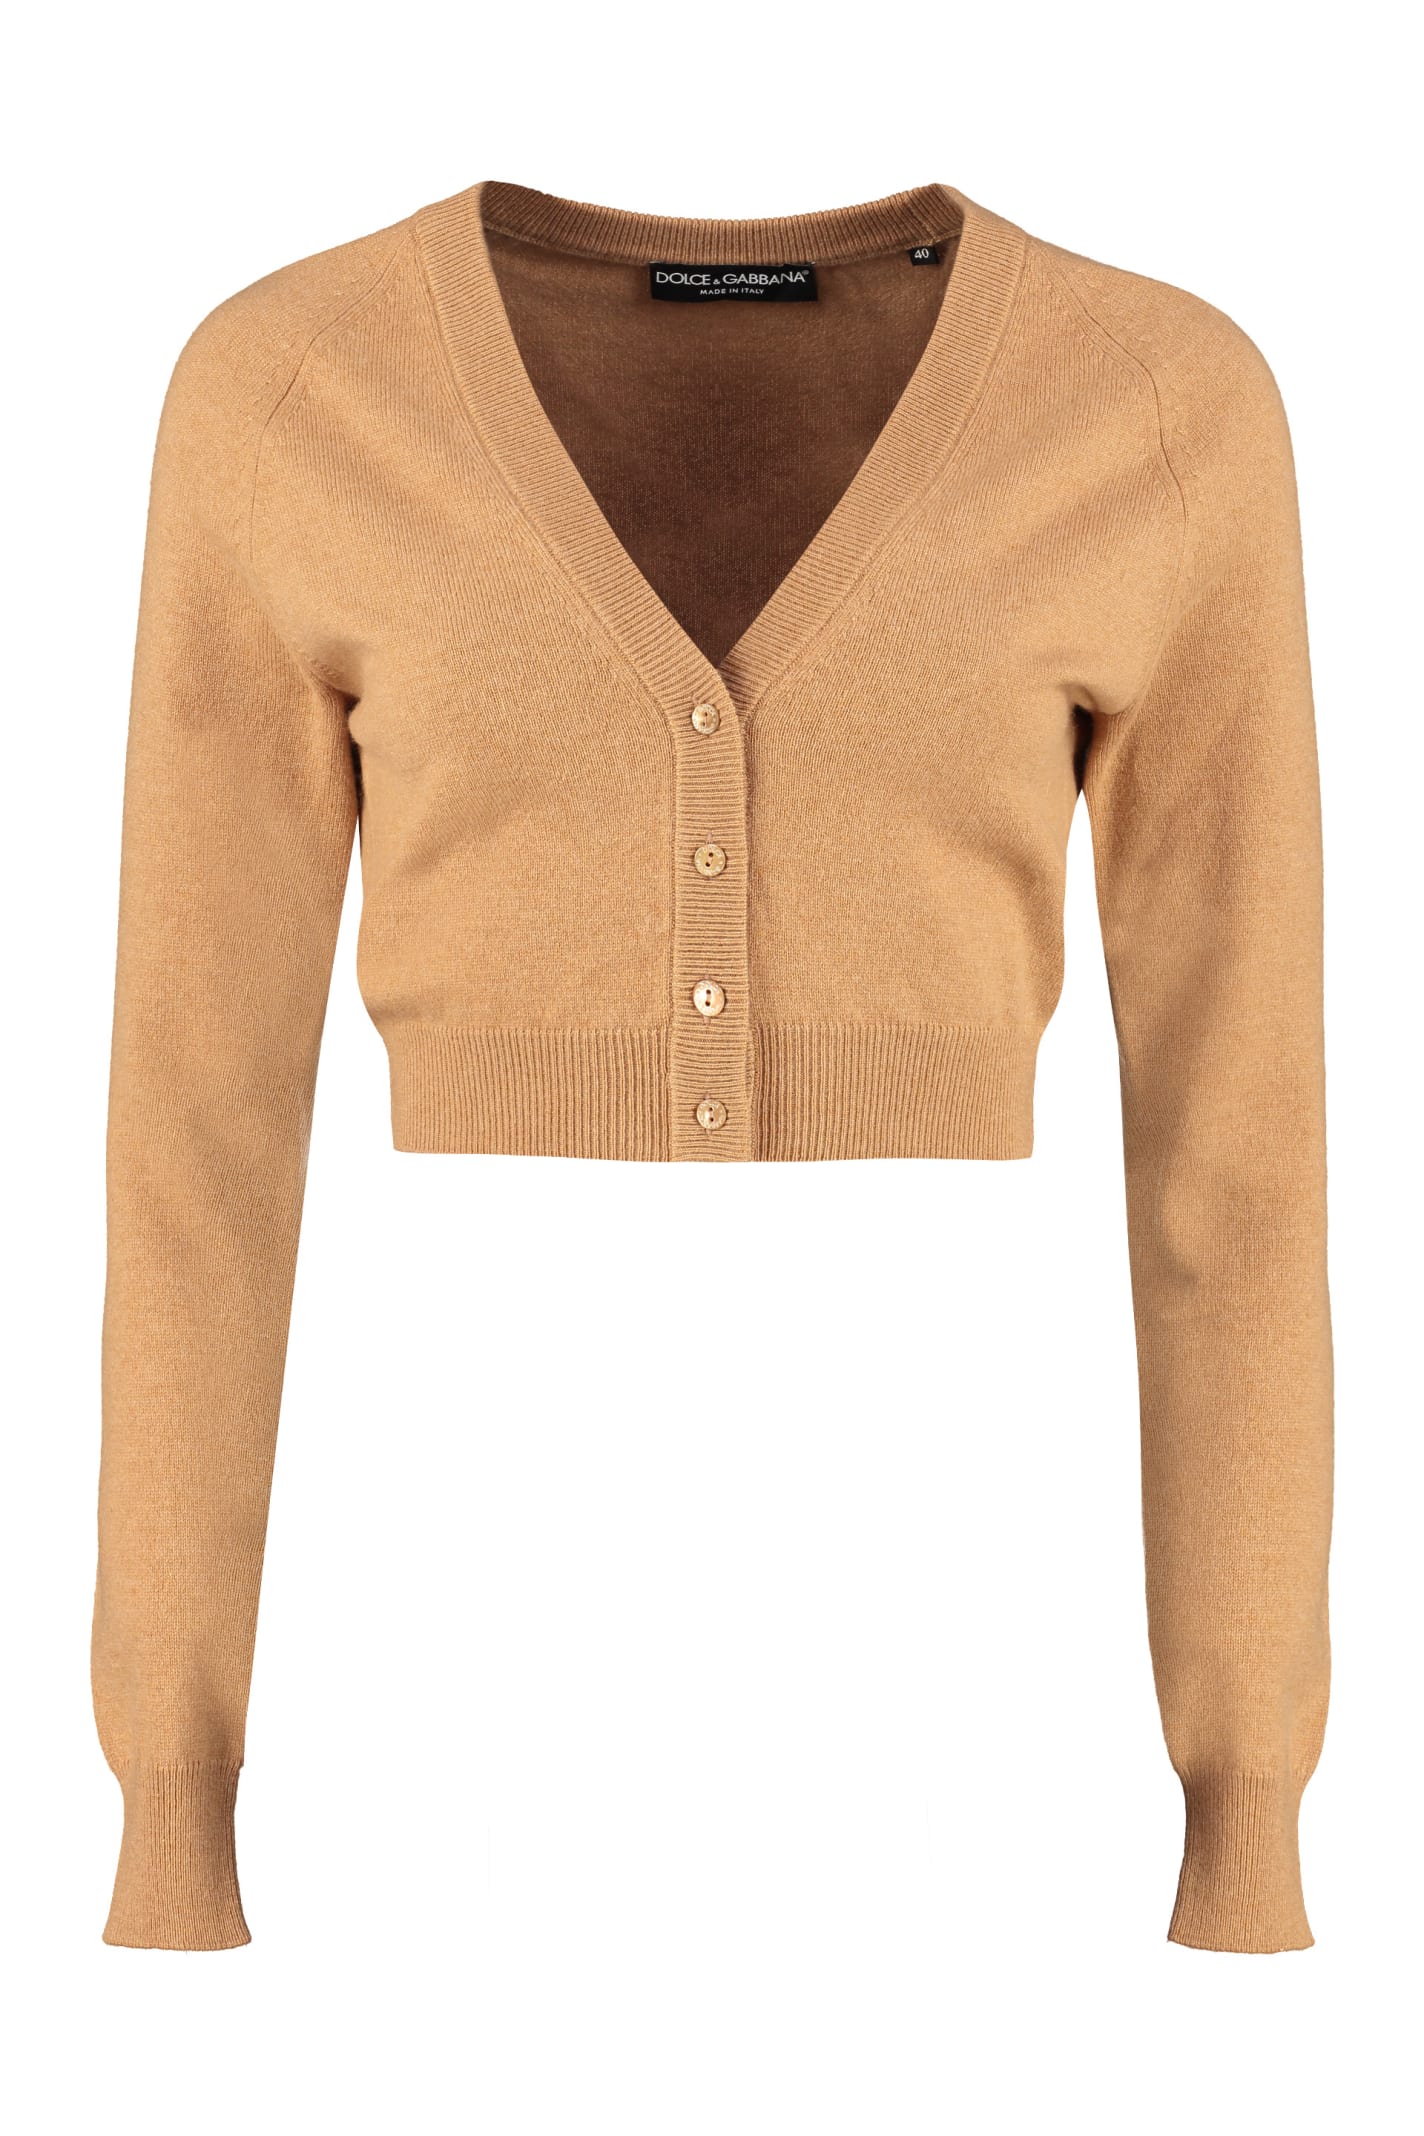 Dolce & Gabbana Cropped Cashmere Cardigan In Brown